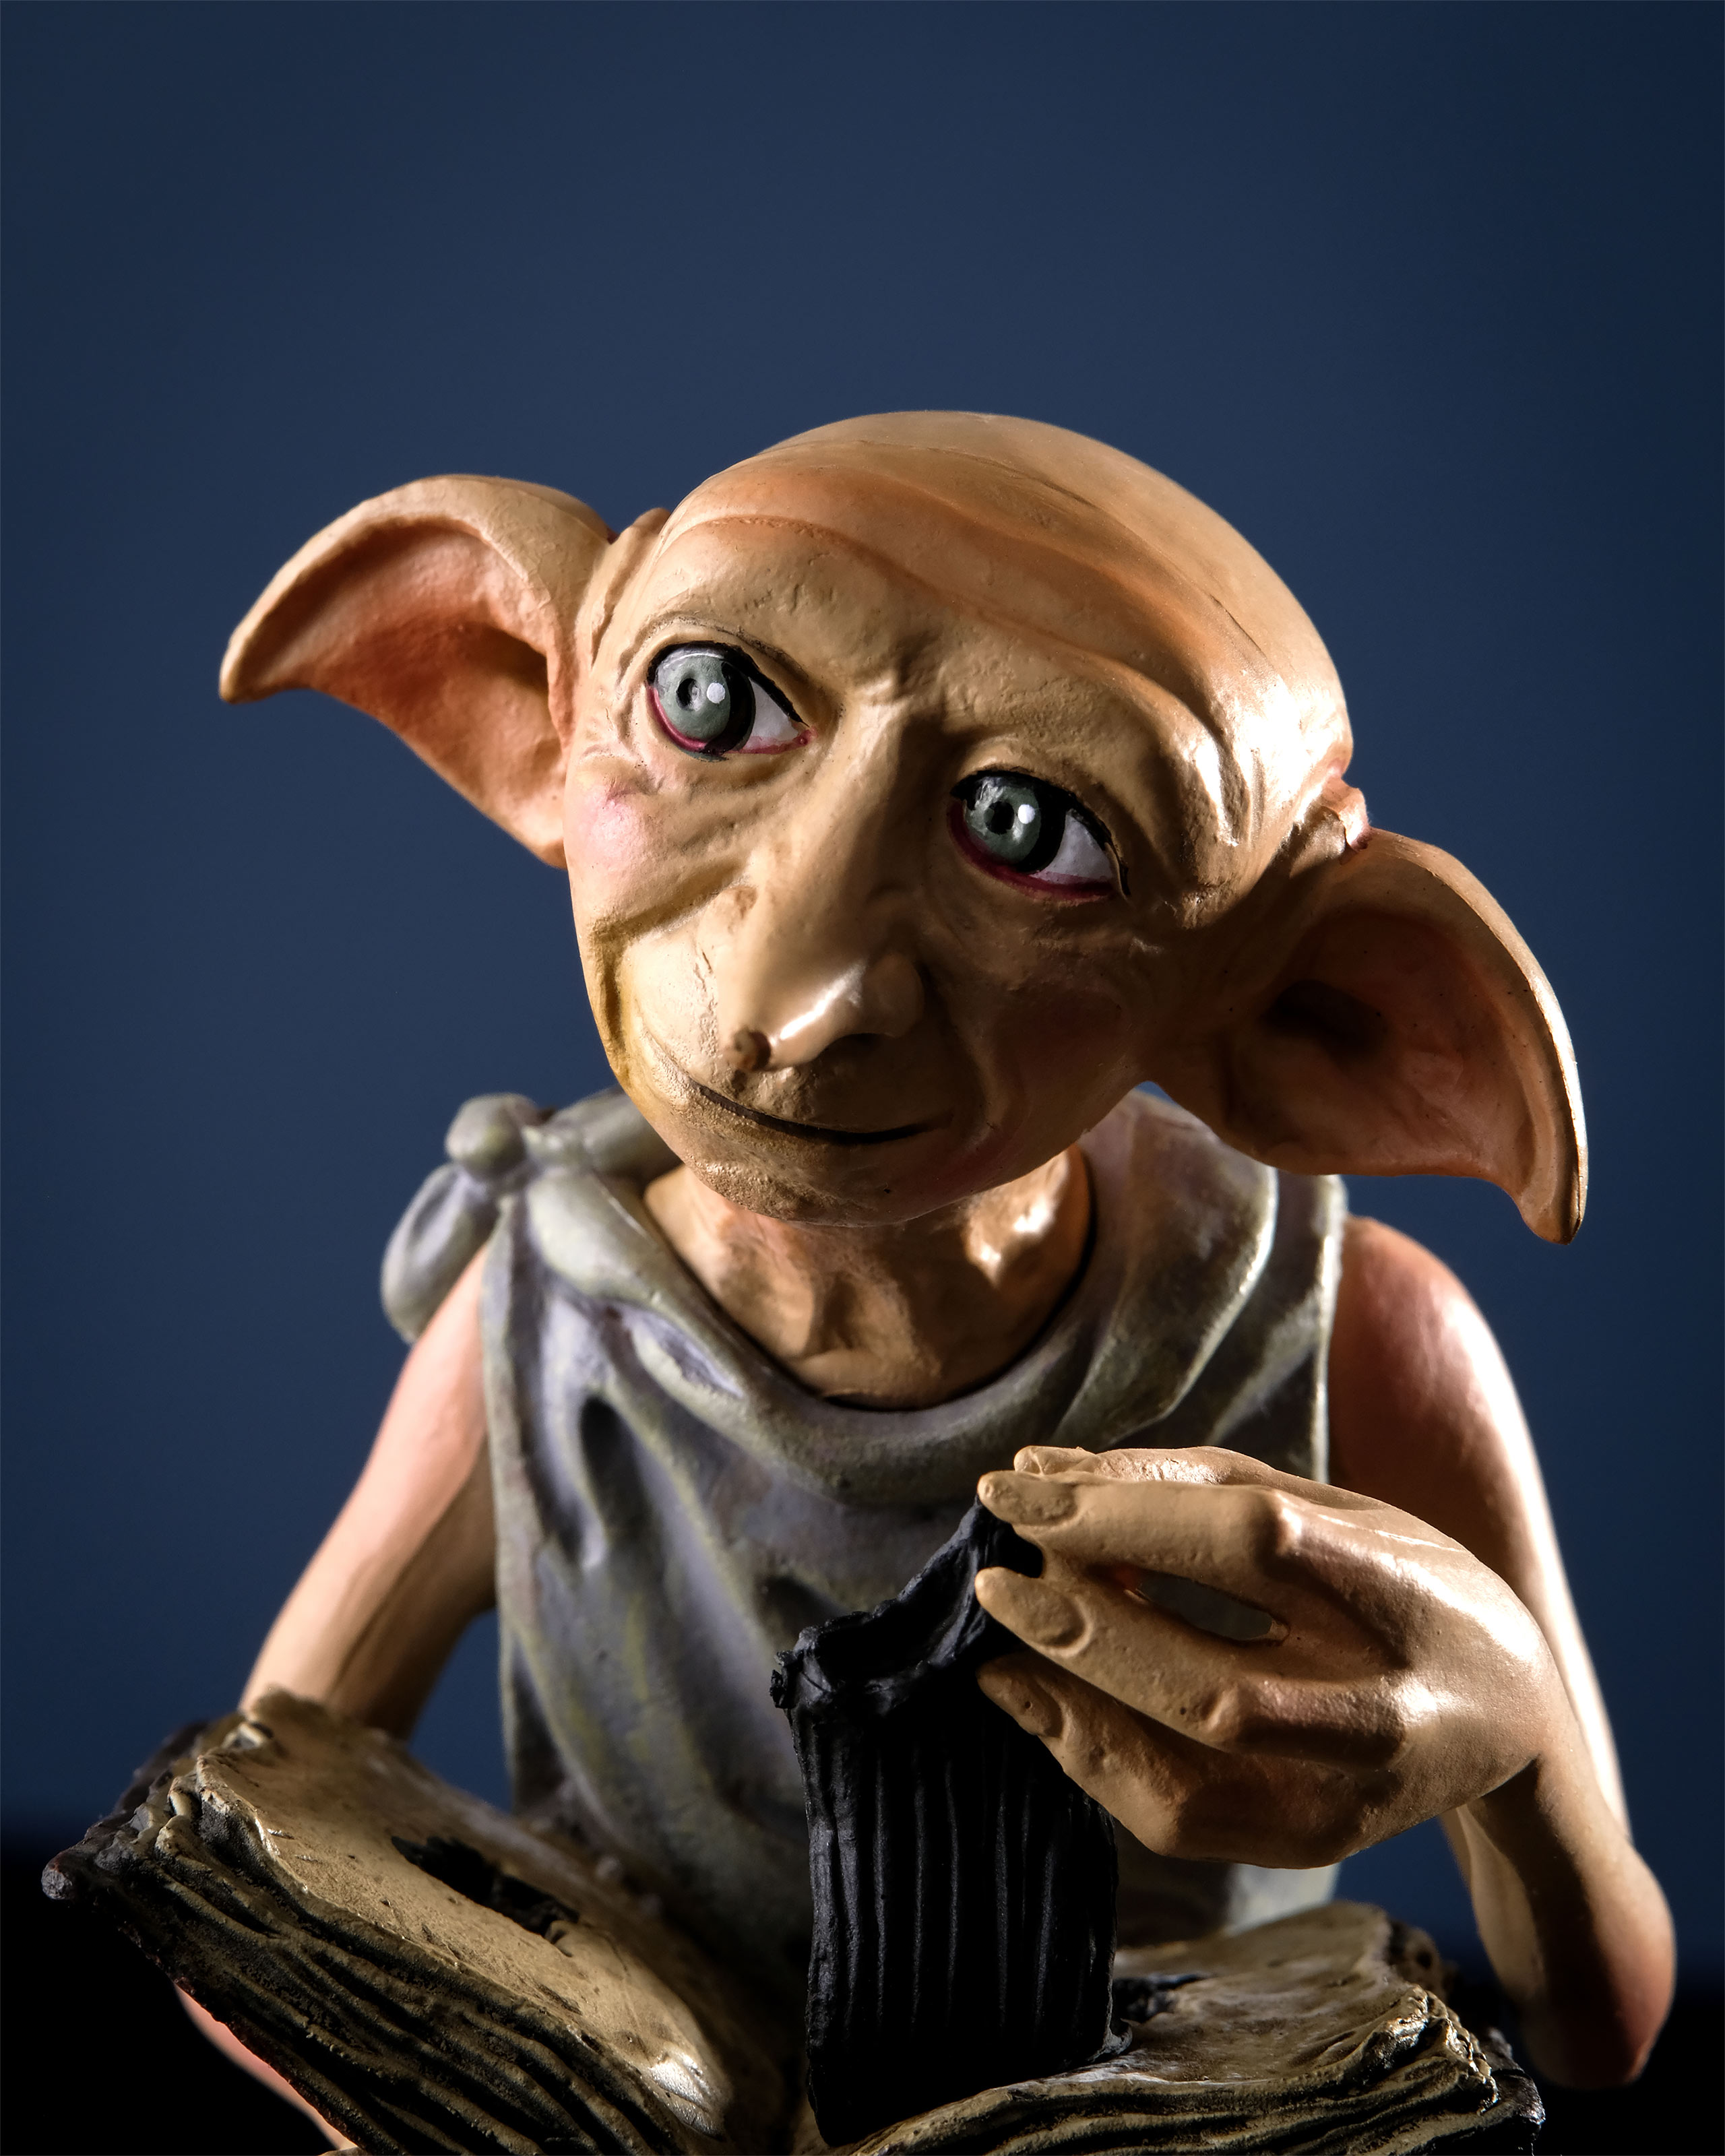 Dobby - Harry Potter Magical Creatures Figure